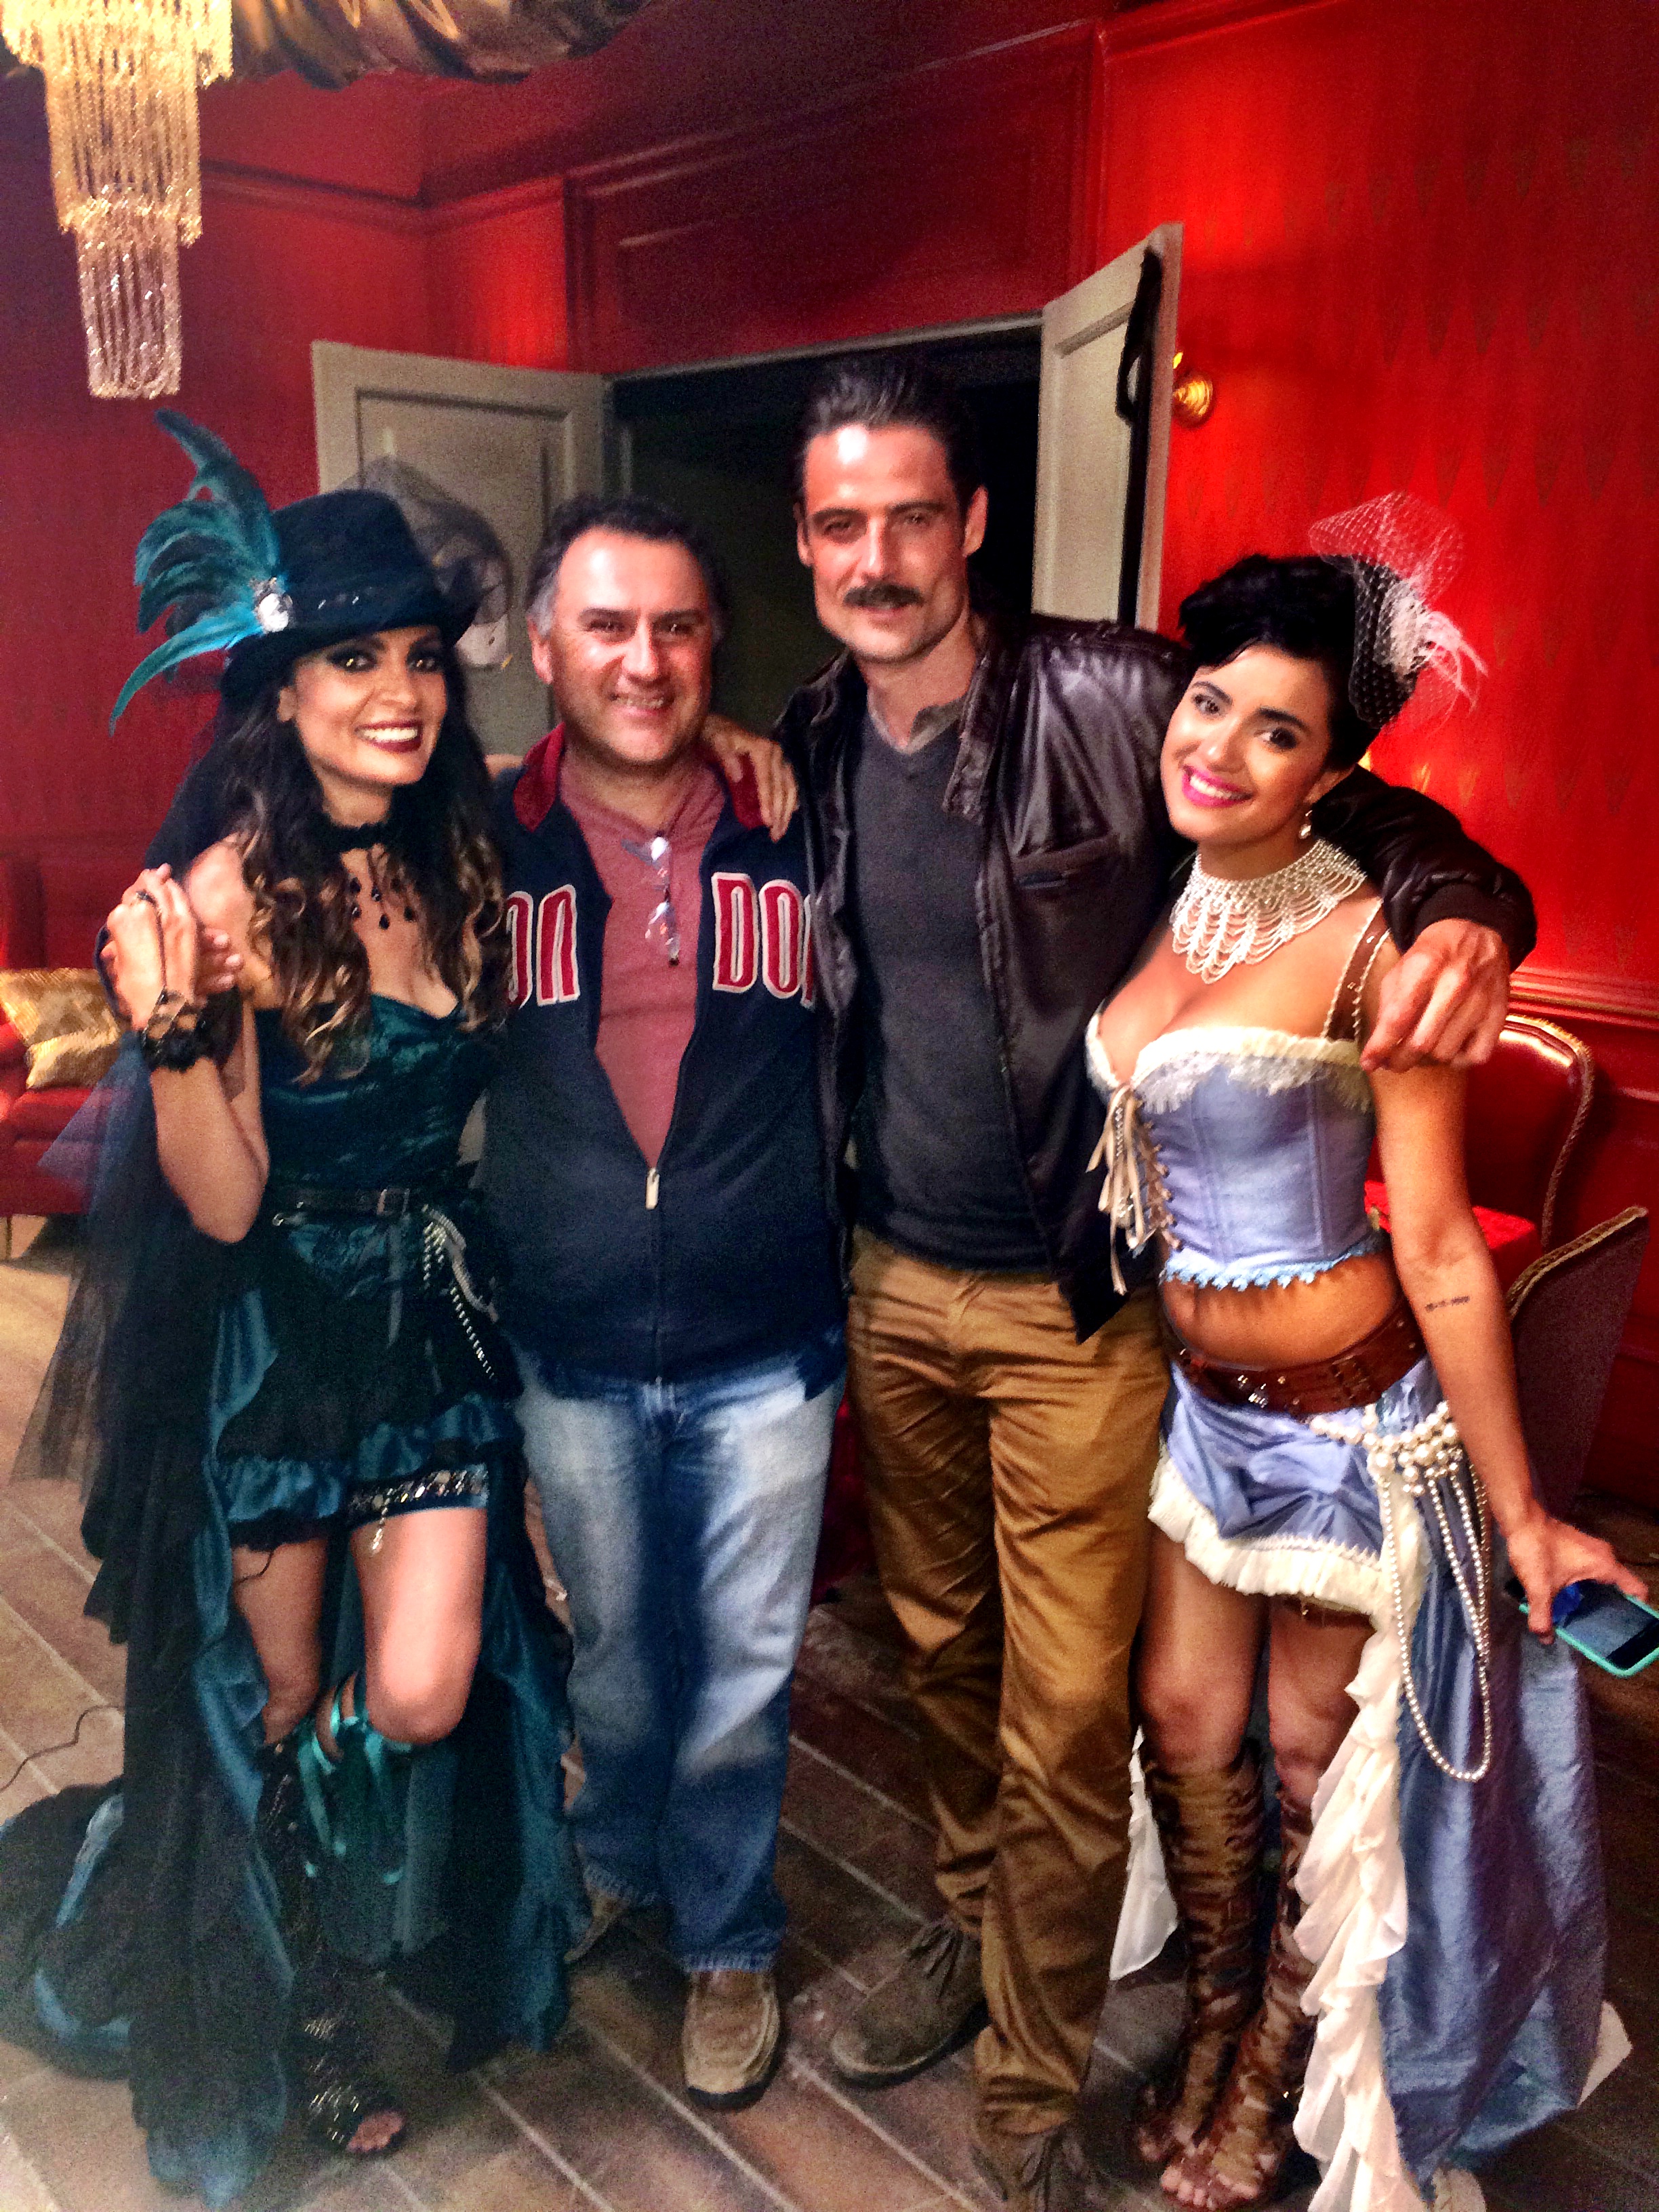 on set of Ruta Madre with Director Augustine Castaneda and actor William Miller and actress Paulina Gaitan.